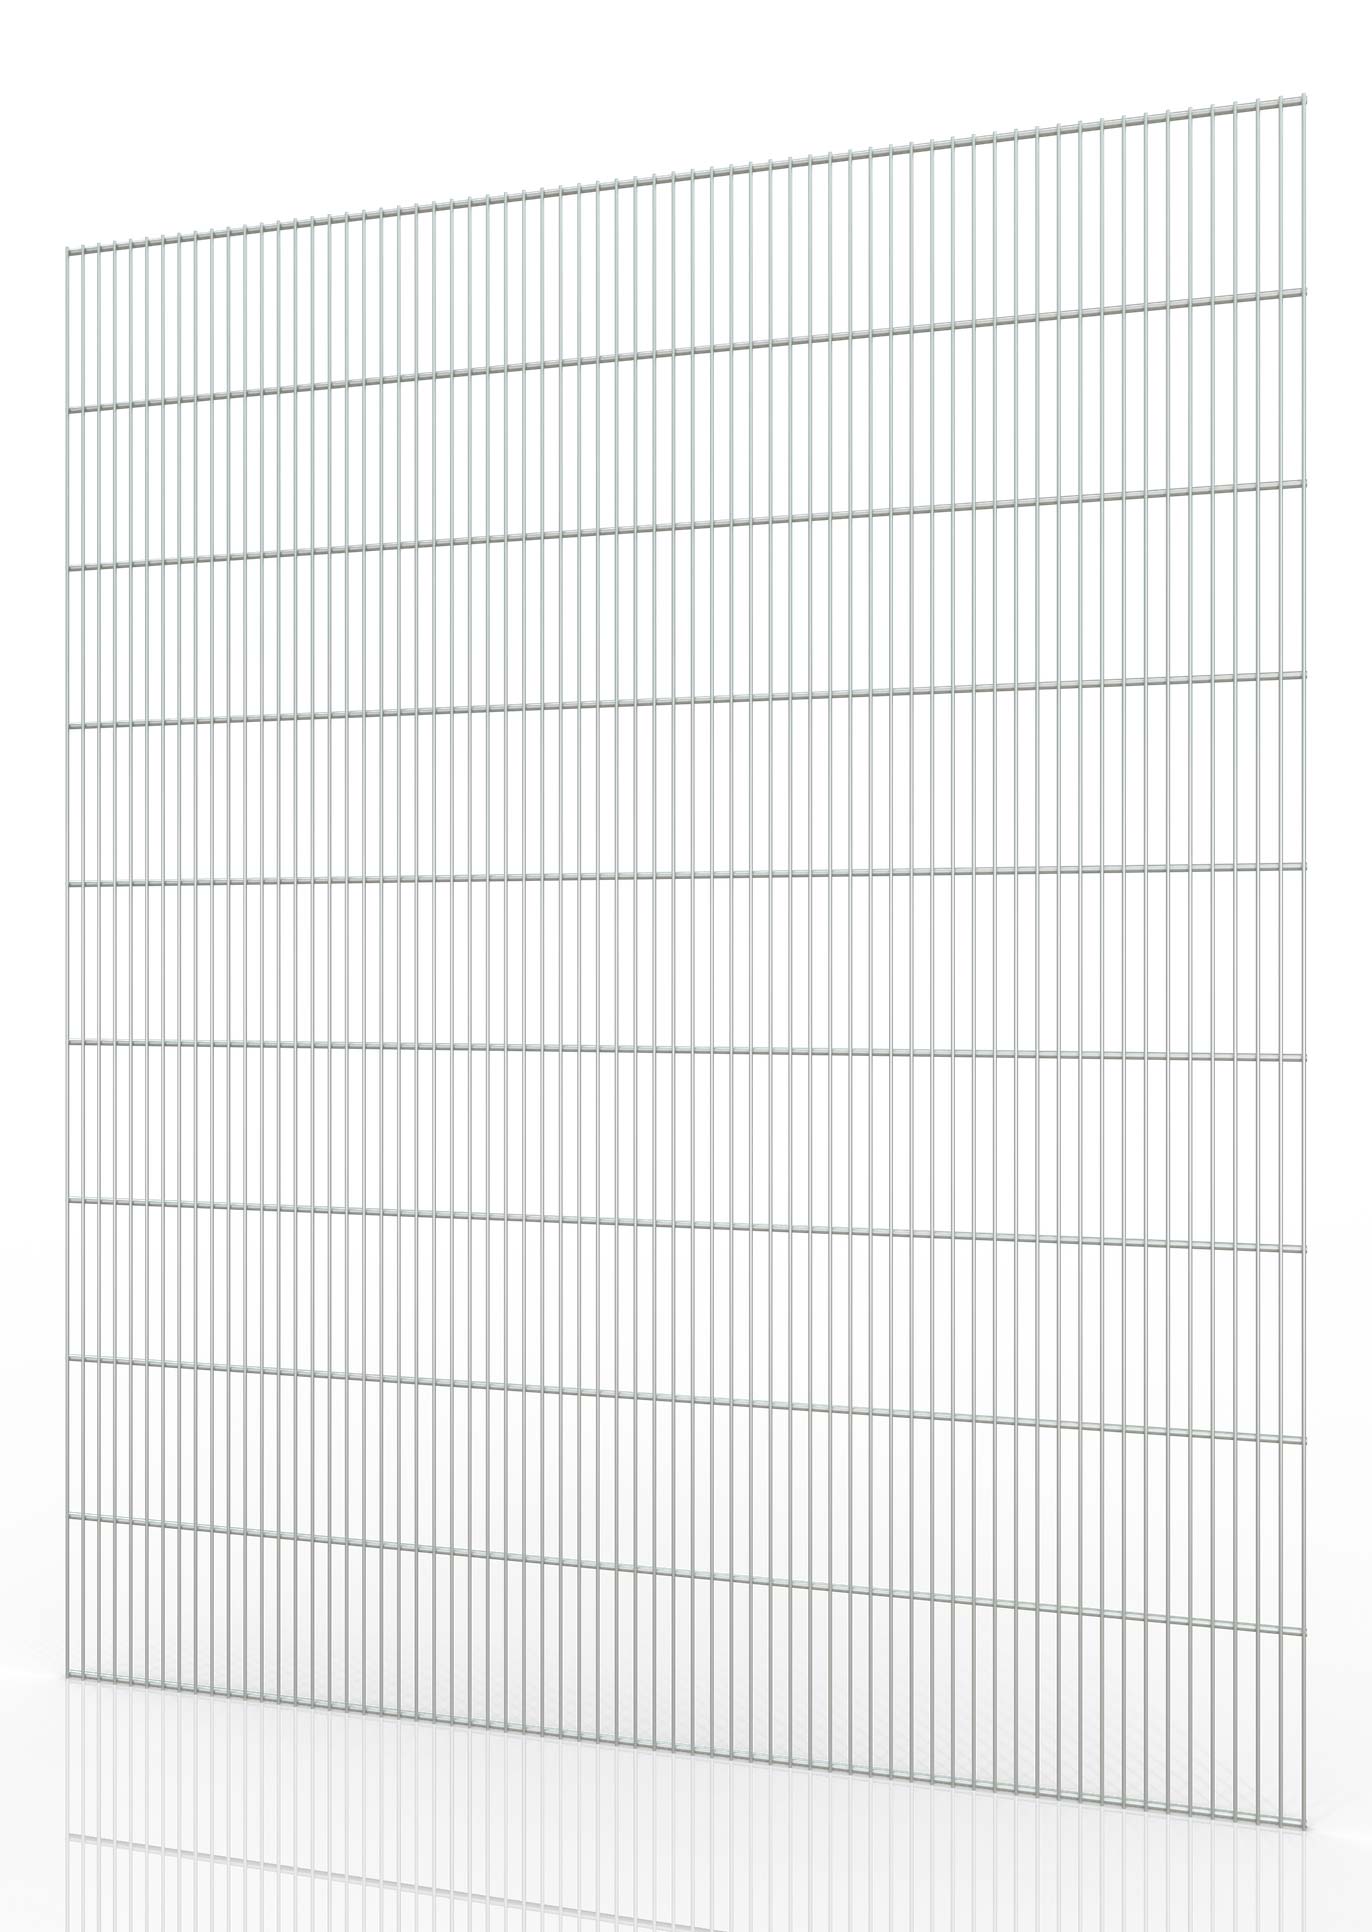 Protection fence stainless steel grid 1500mm